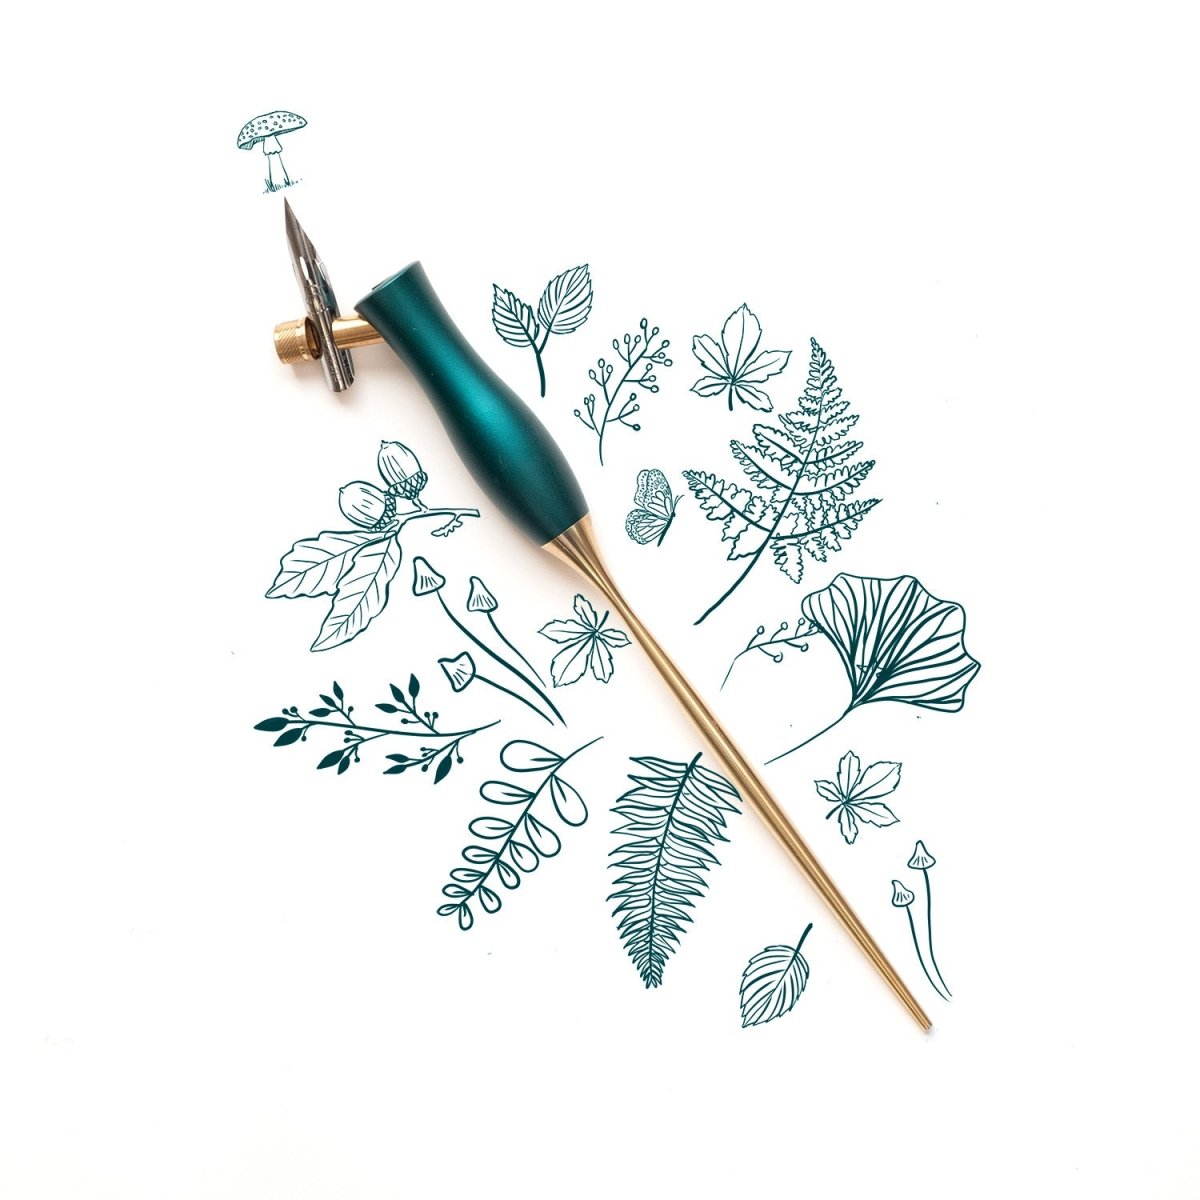 The Bloom calligraphy pen in green with offset nib